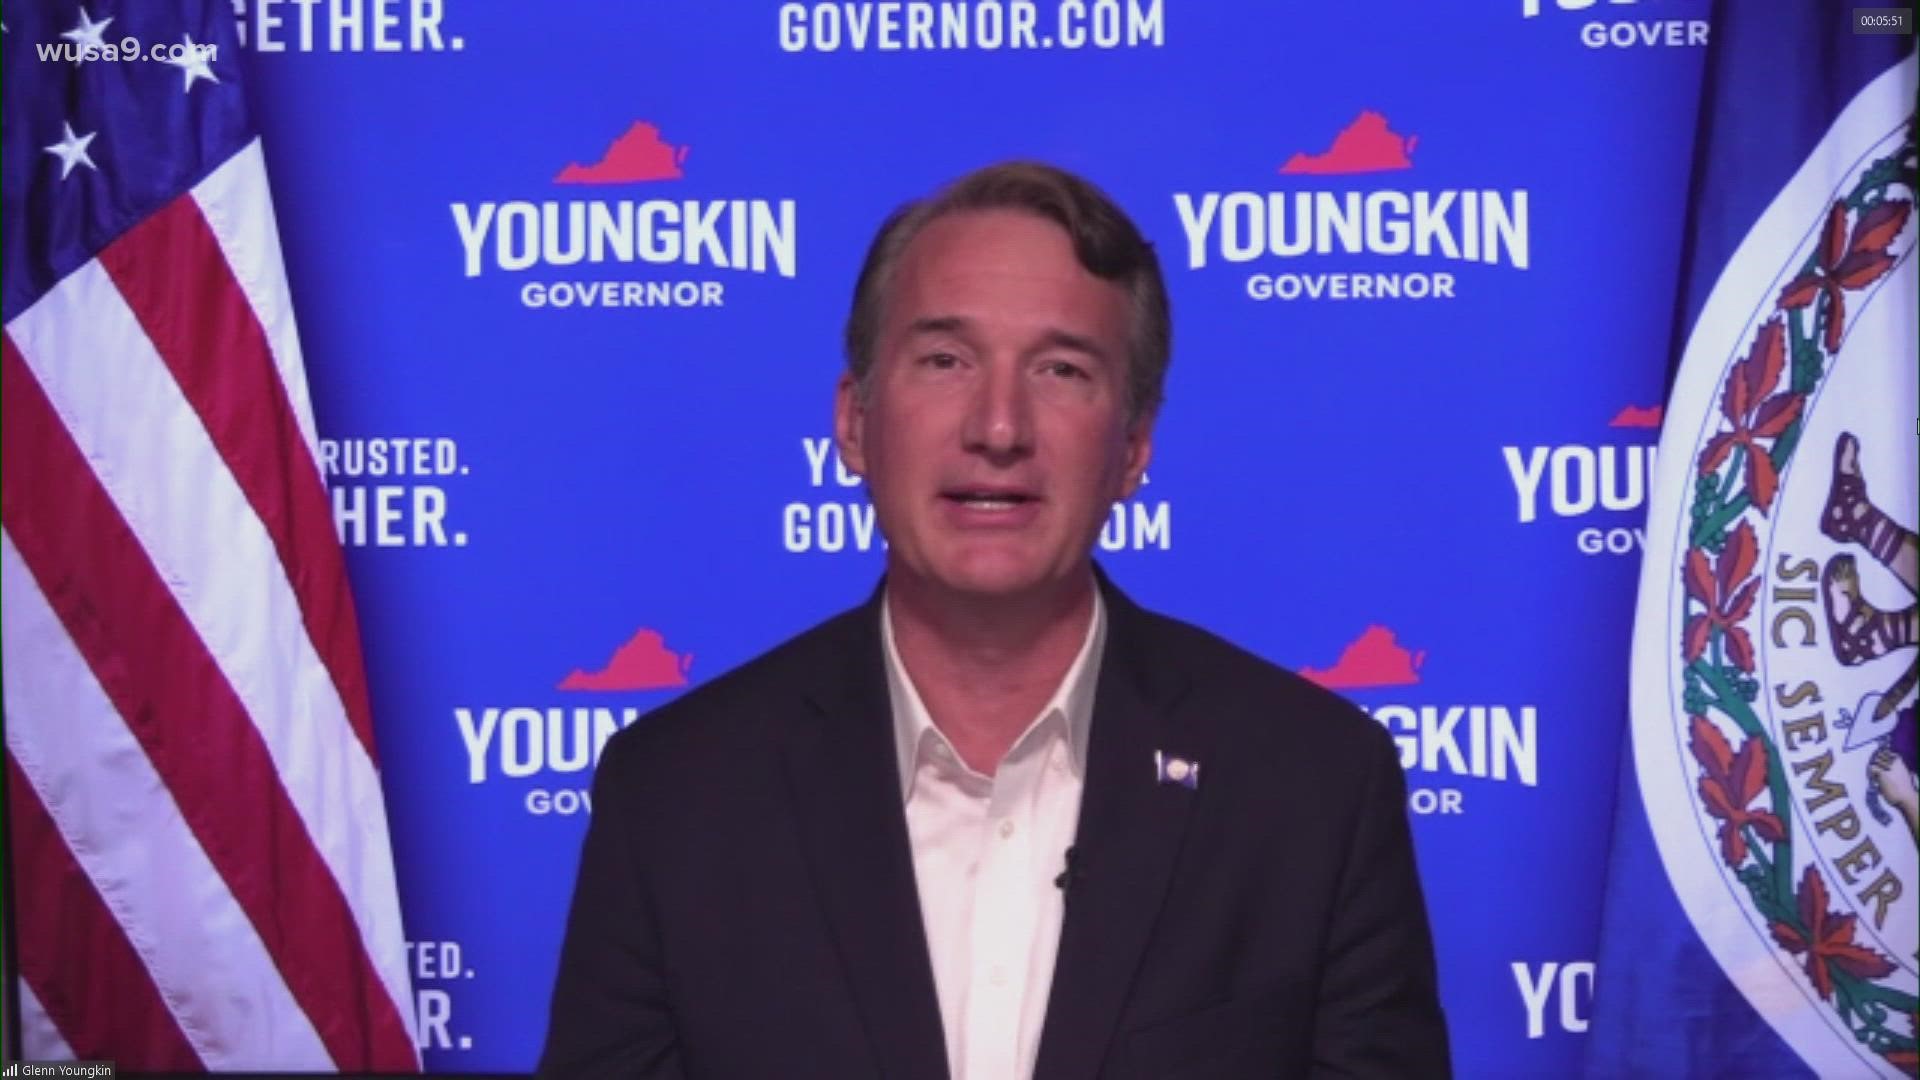 We asked Youngkin why he's the best person to lead Virginia as governor, and his stance on vaccine mandates.